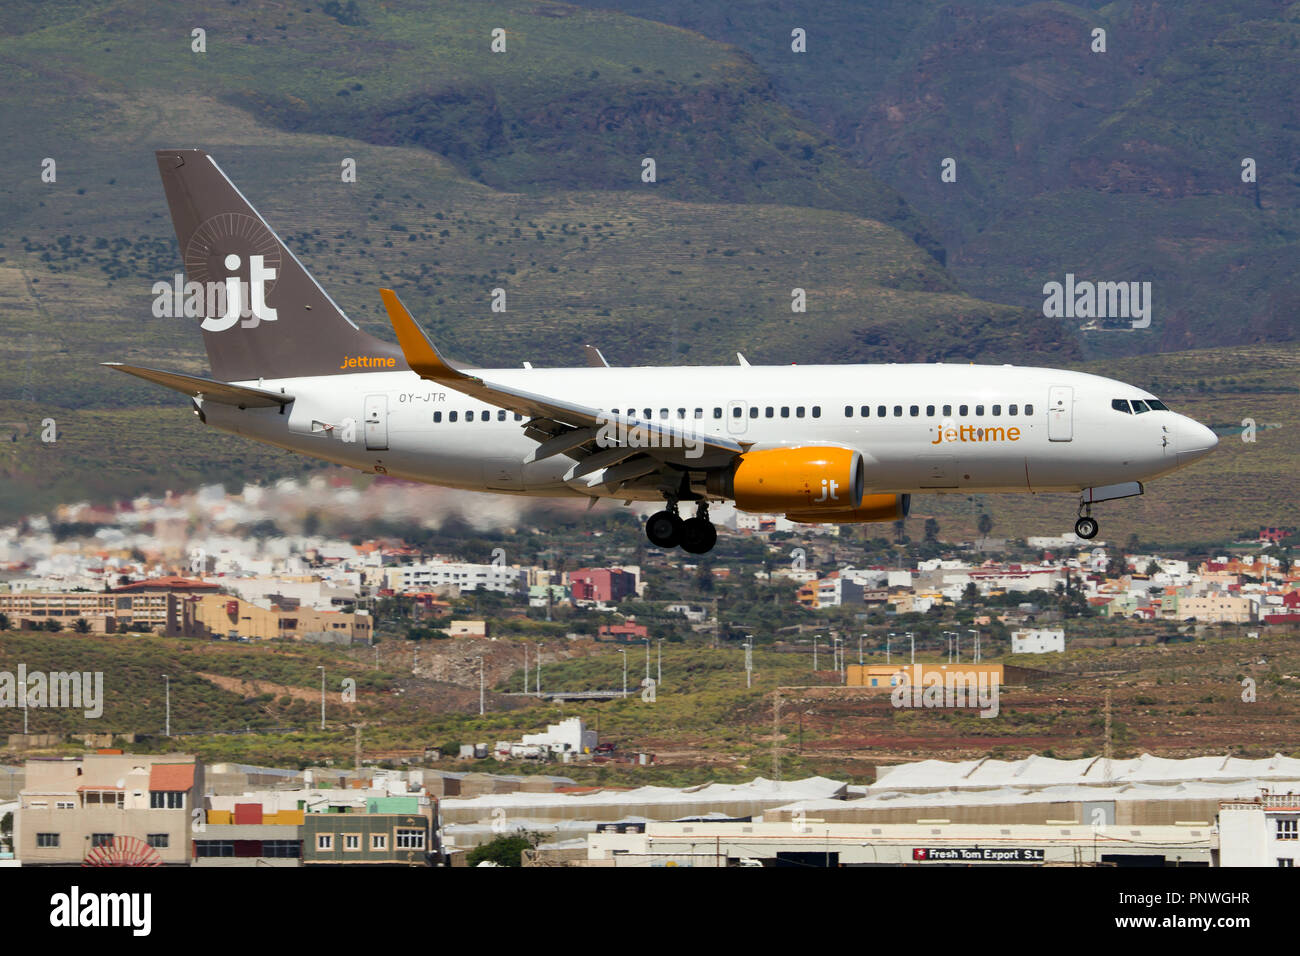 A Jettime Boeing 737-700 seen a few seconds before landing at Gran Canaria, Las  Palmas airport Stock Photo - Alamy